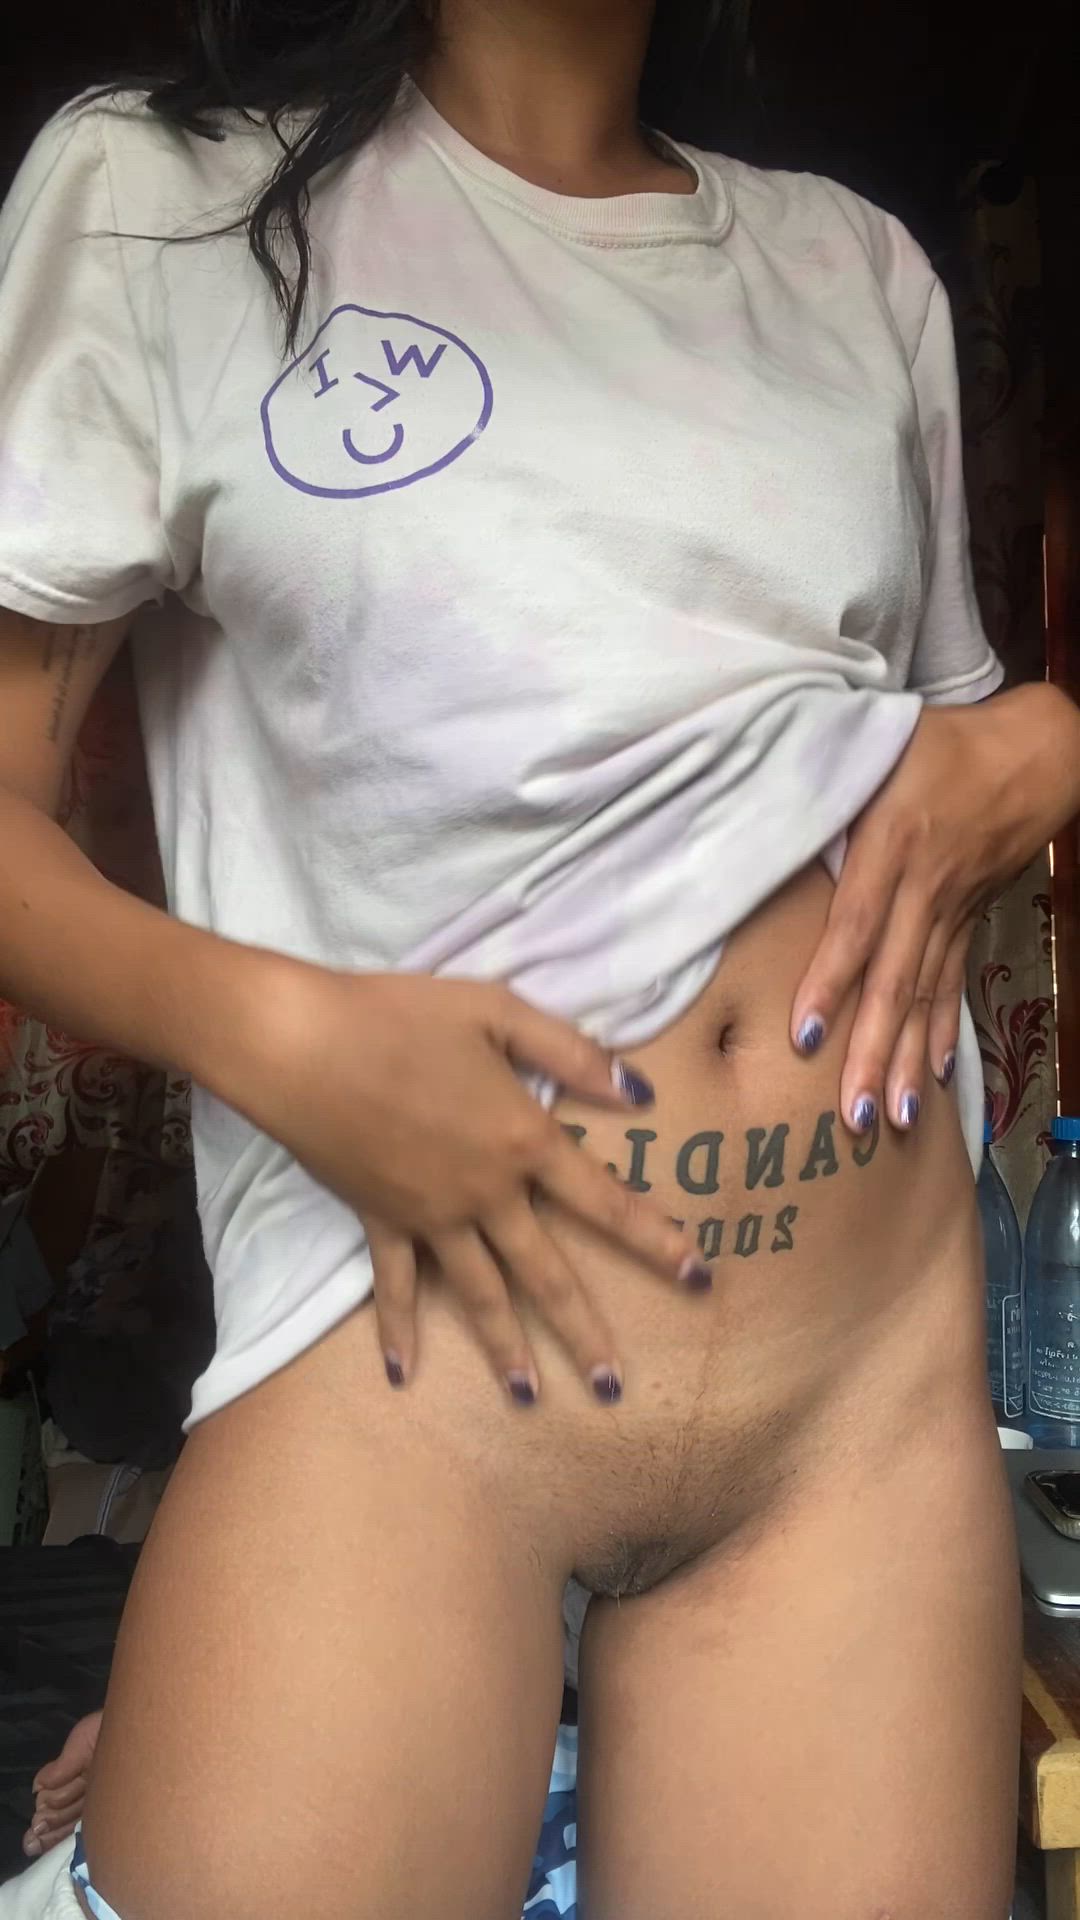 Boobs porn video with onlyfans model itscandle20 <strong>@itscandle20</strong>